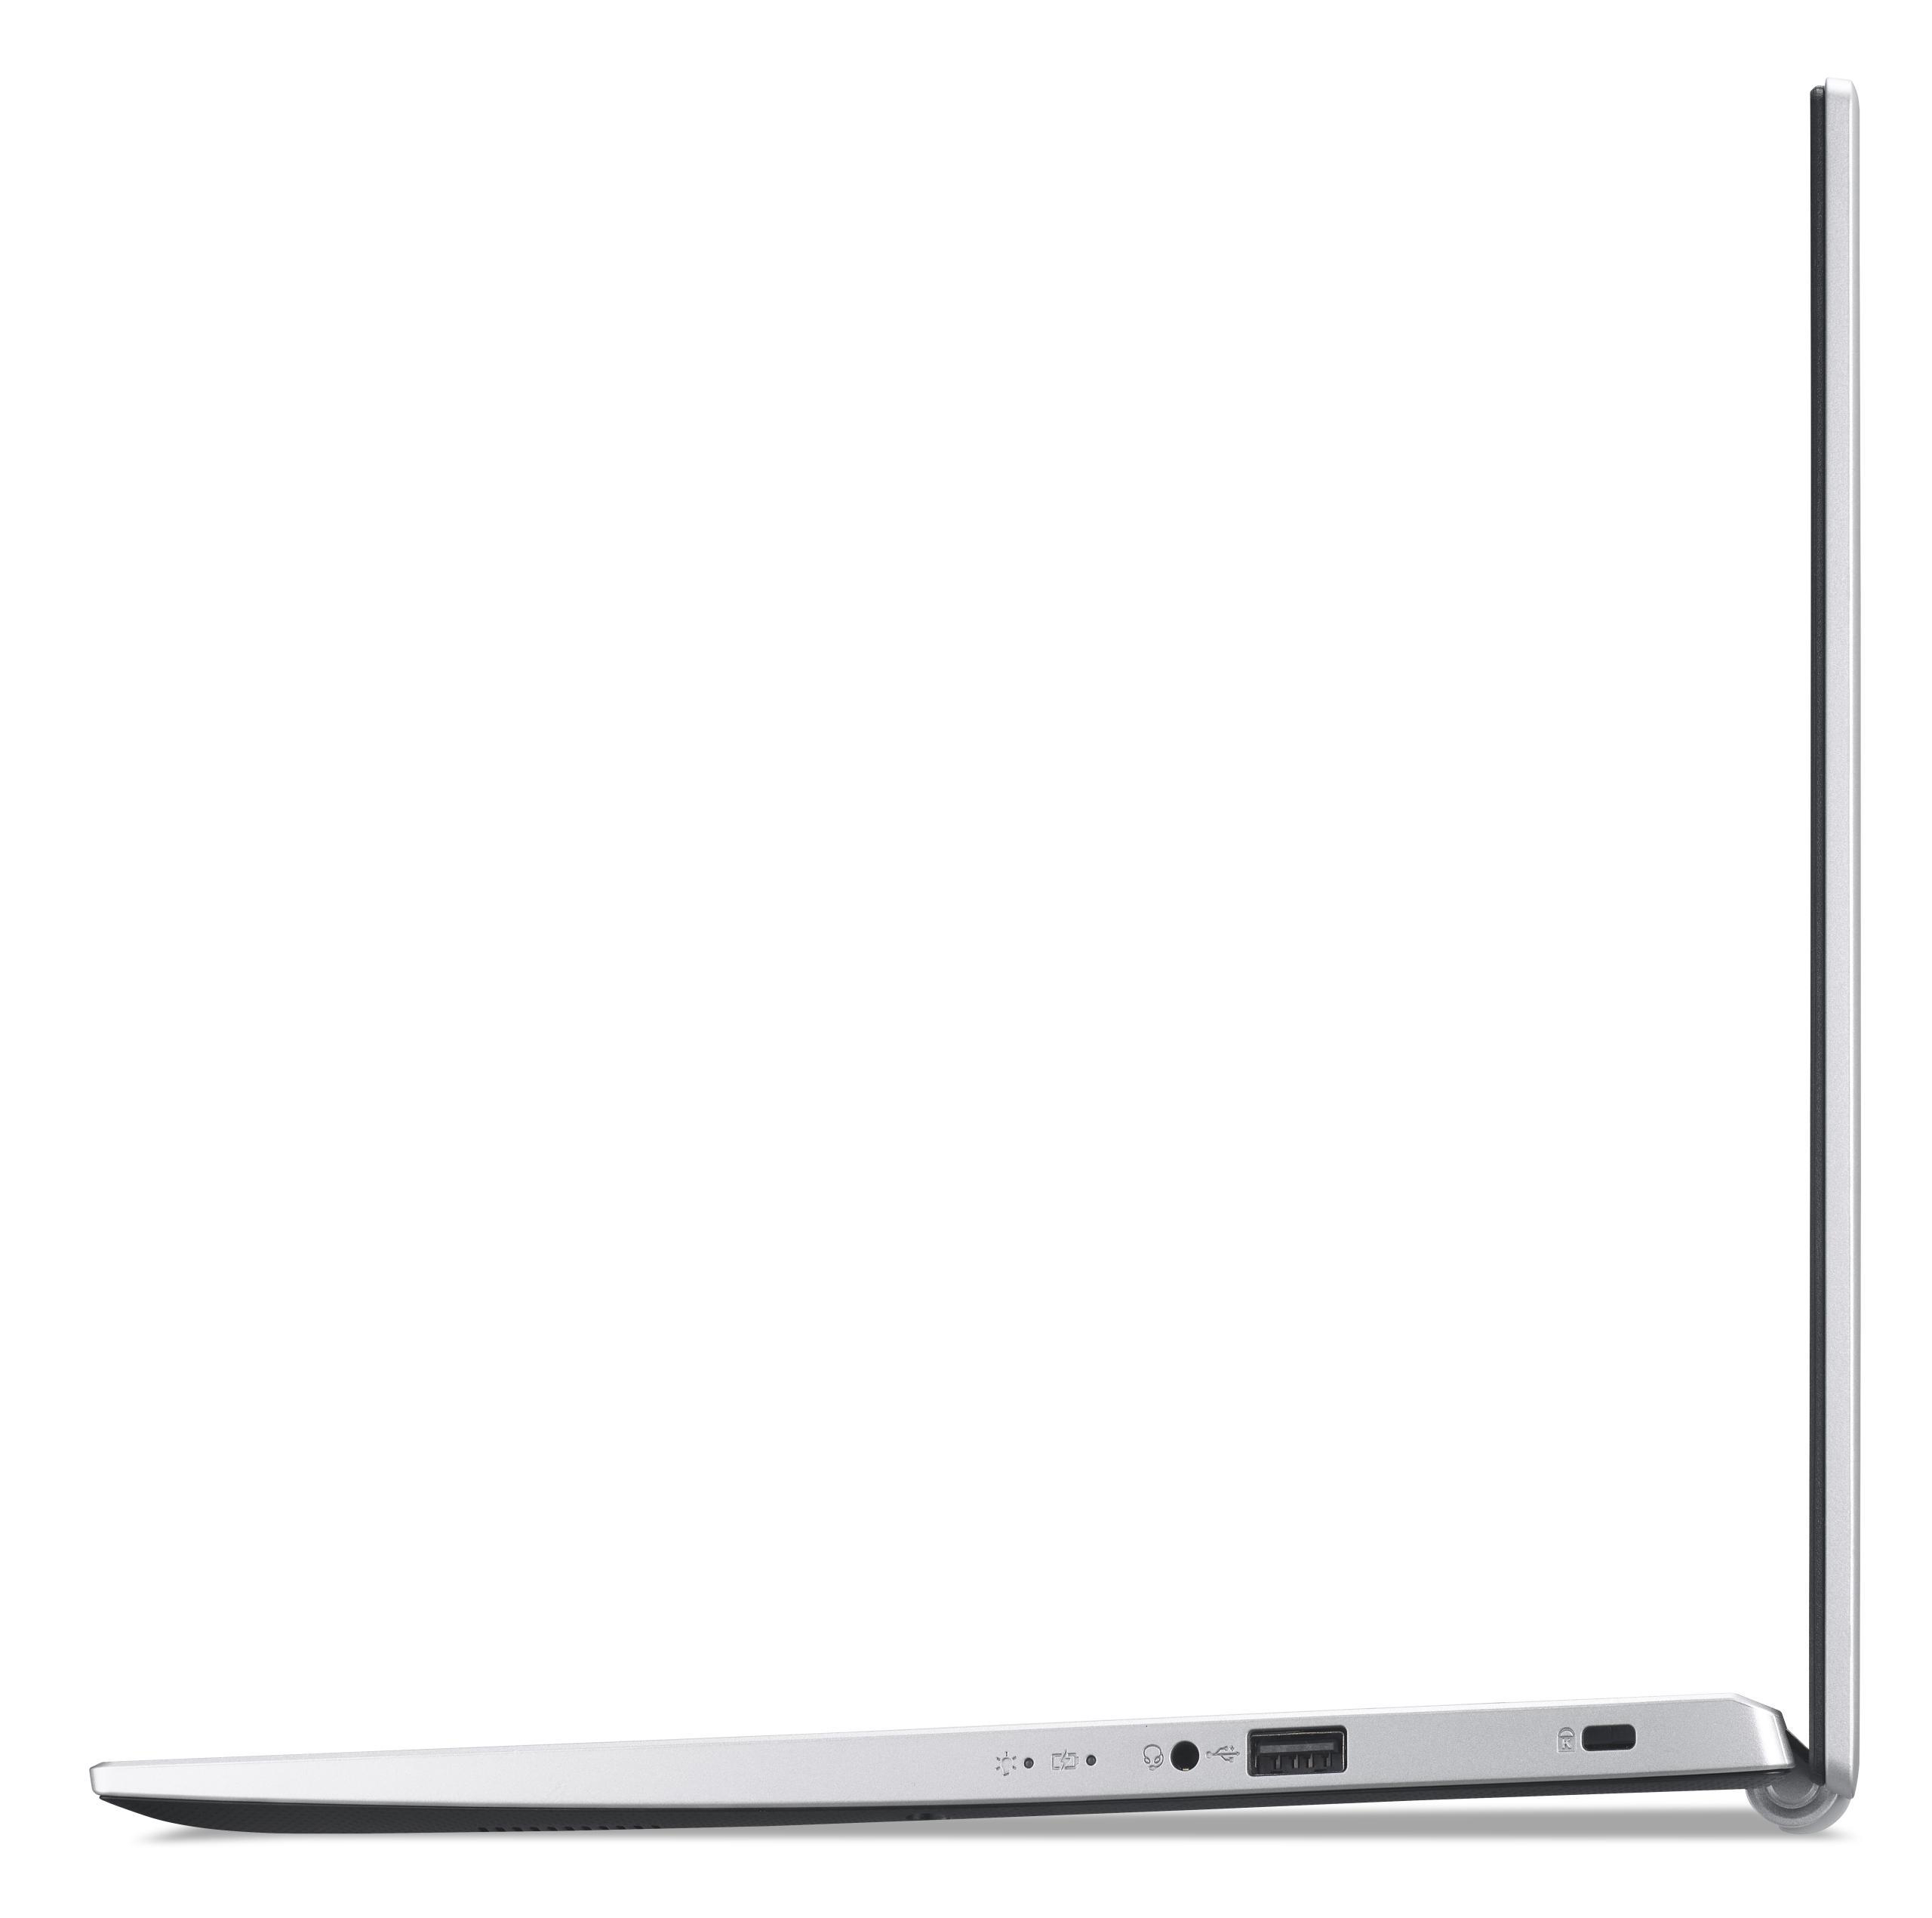 ACER Aspire 3 (A317-53-76NV), 16 Pure Prozessor, RAM, GB Intel® Zoll i7 512 GB mit Core™ Notebook Display, Silver 17,3 SSD